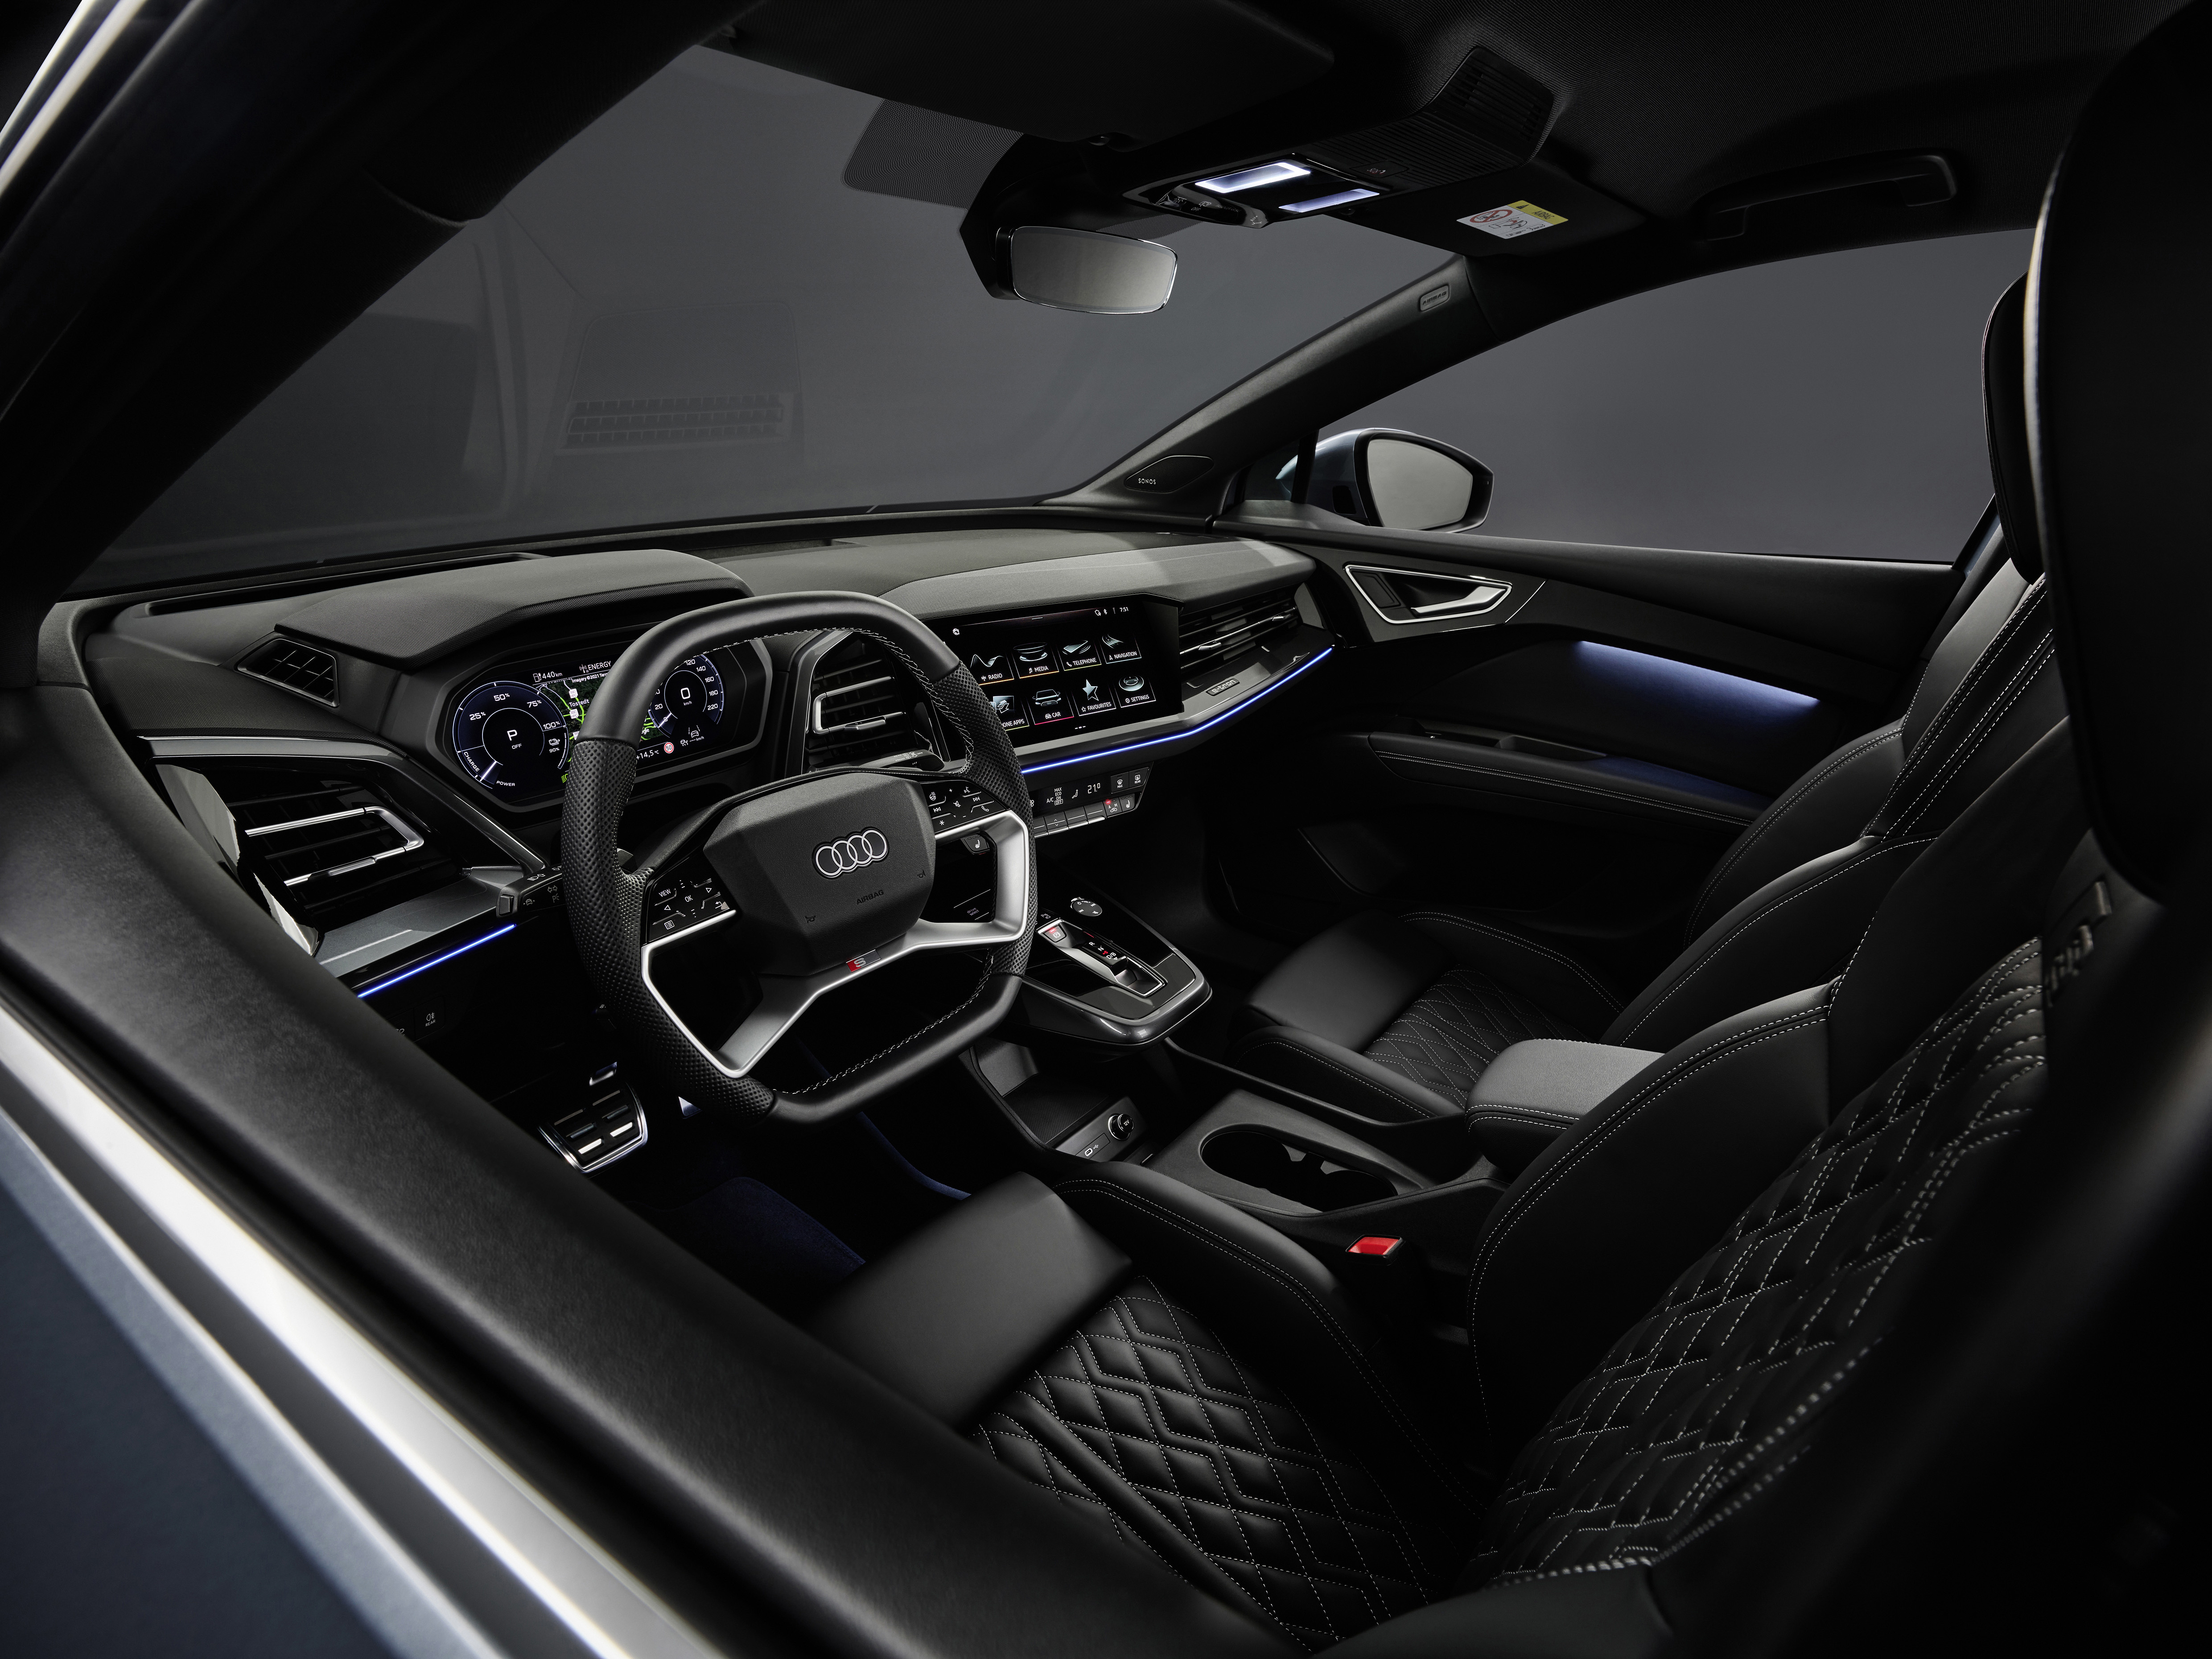 Hop Aboard the Upcoming Audi Q4 e-tron and Discover Its High-Tech Interior  - autoevolution